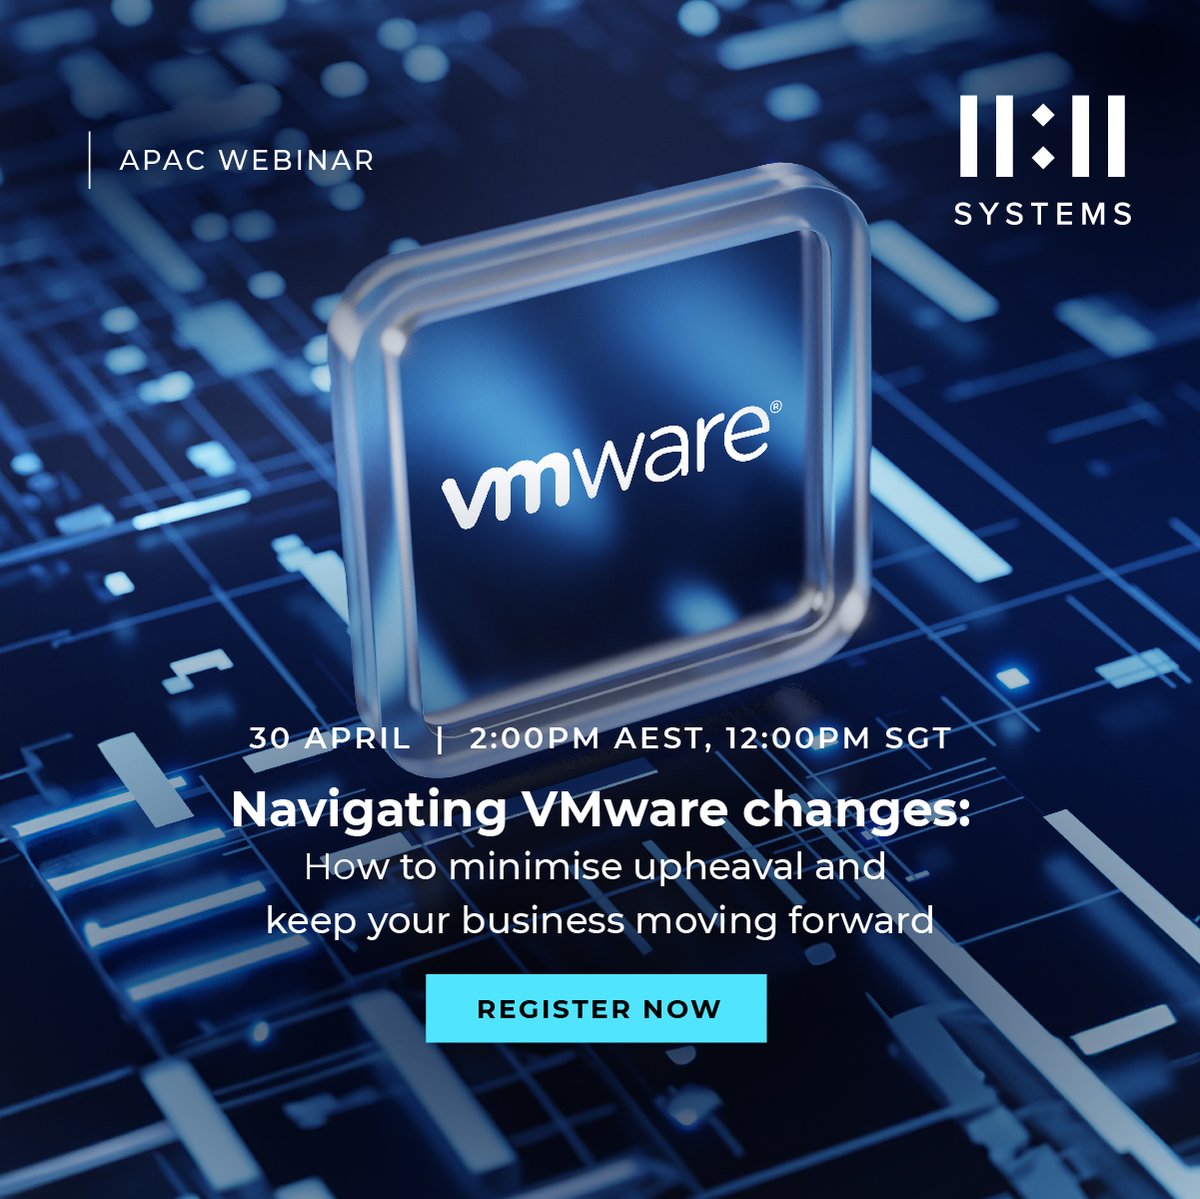 On Tuesday, 30 April, we'll discuss how to take a strategic approach to VMware changes that helps to future-proof your business and explore the best cloud options Learn more and register for the APAC session: 1111systems.com/wb-apr-vmware-…